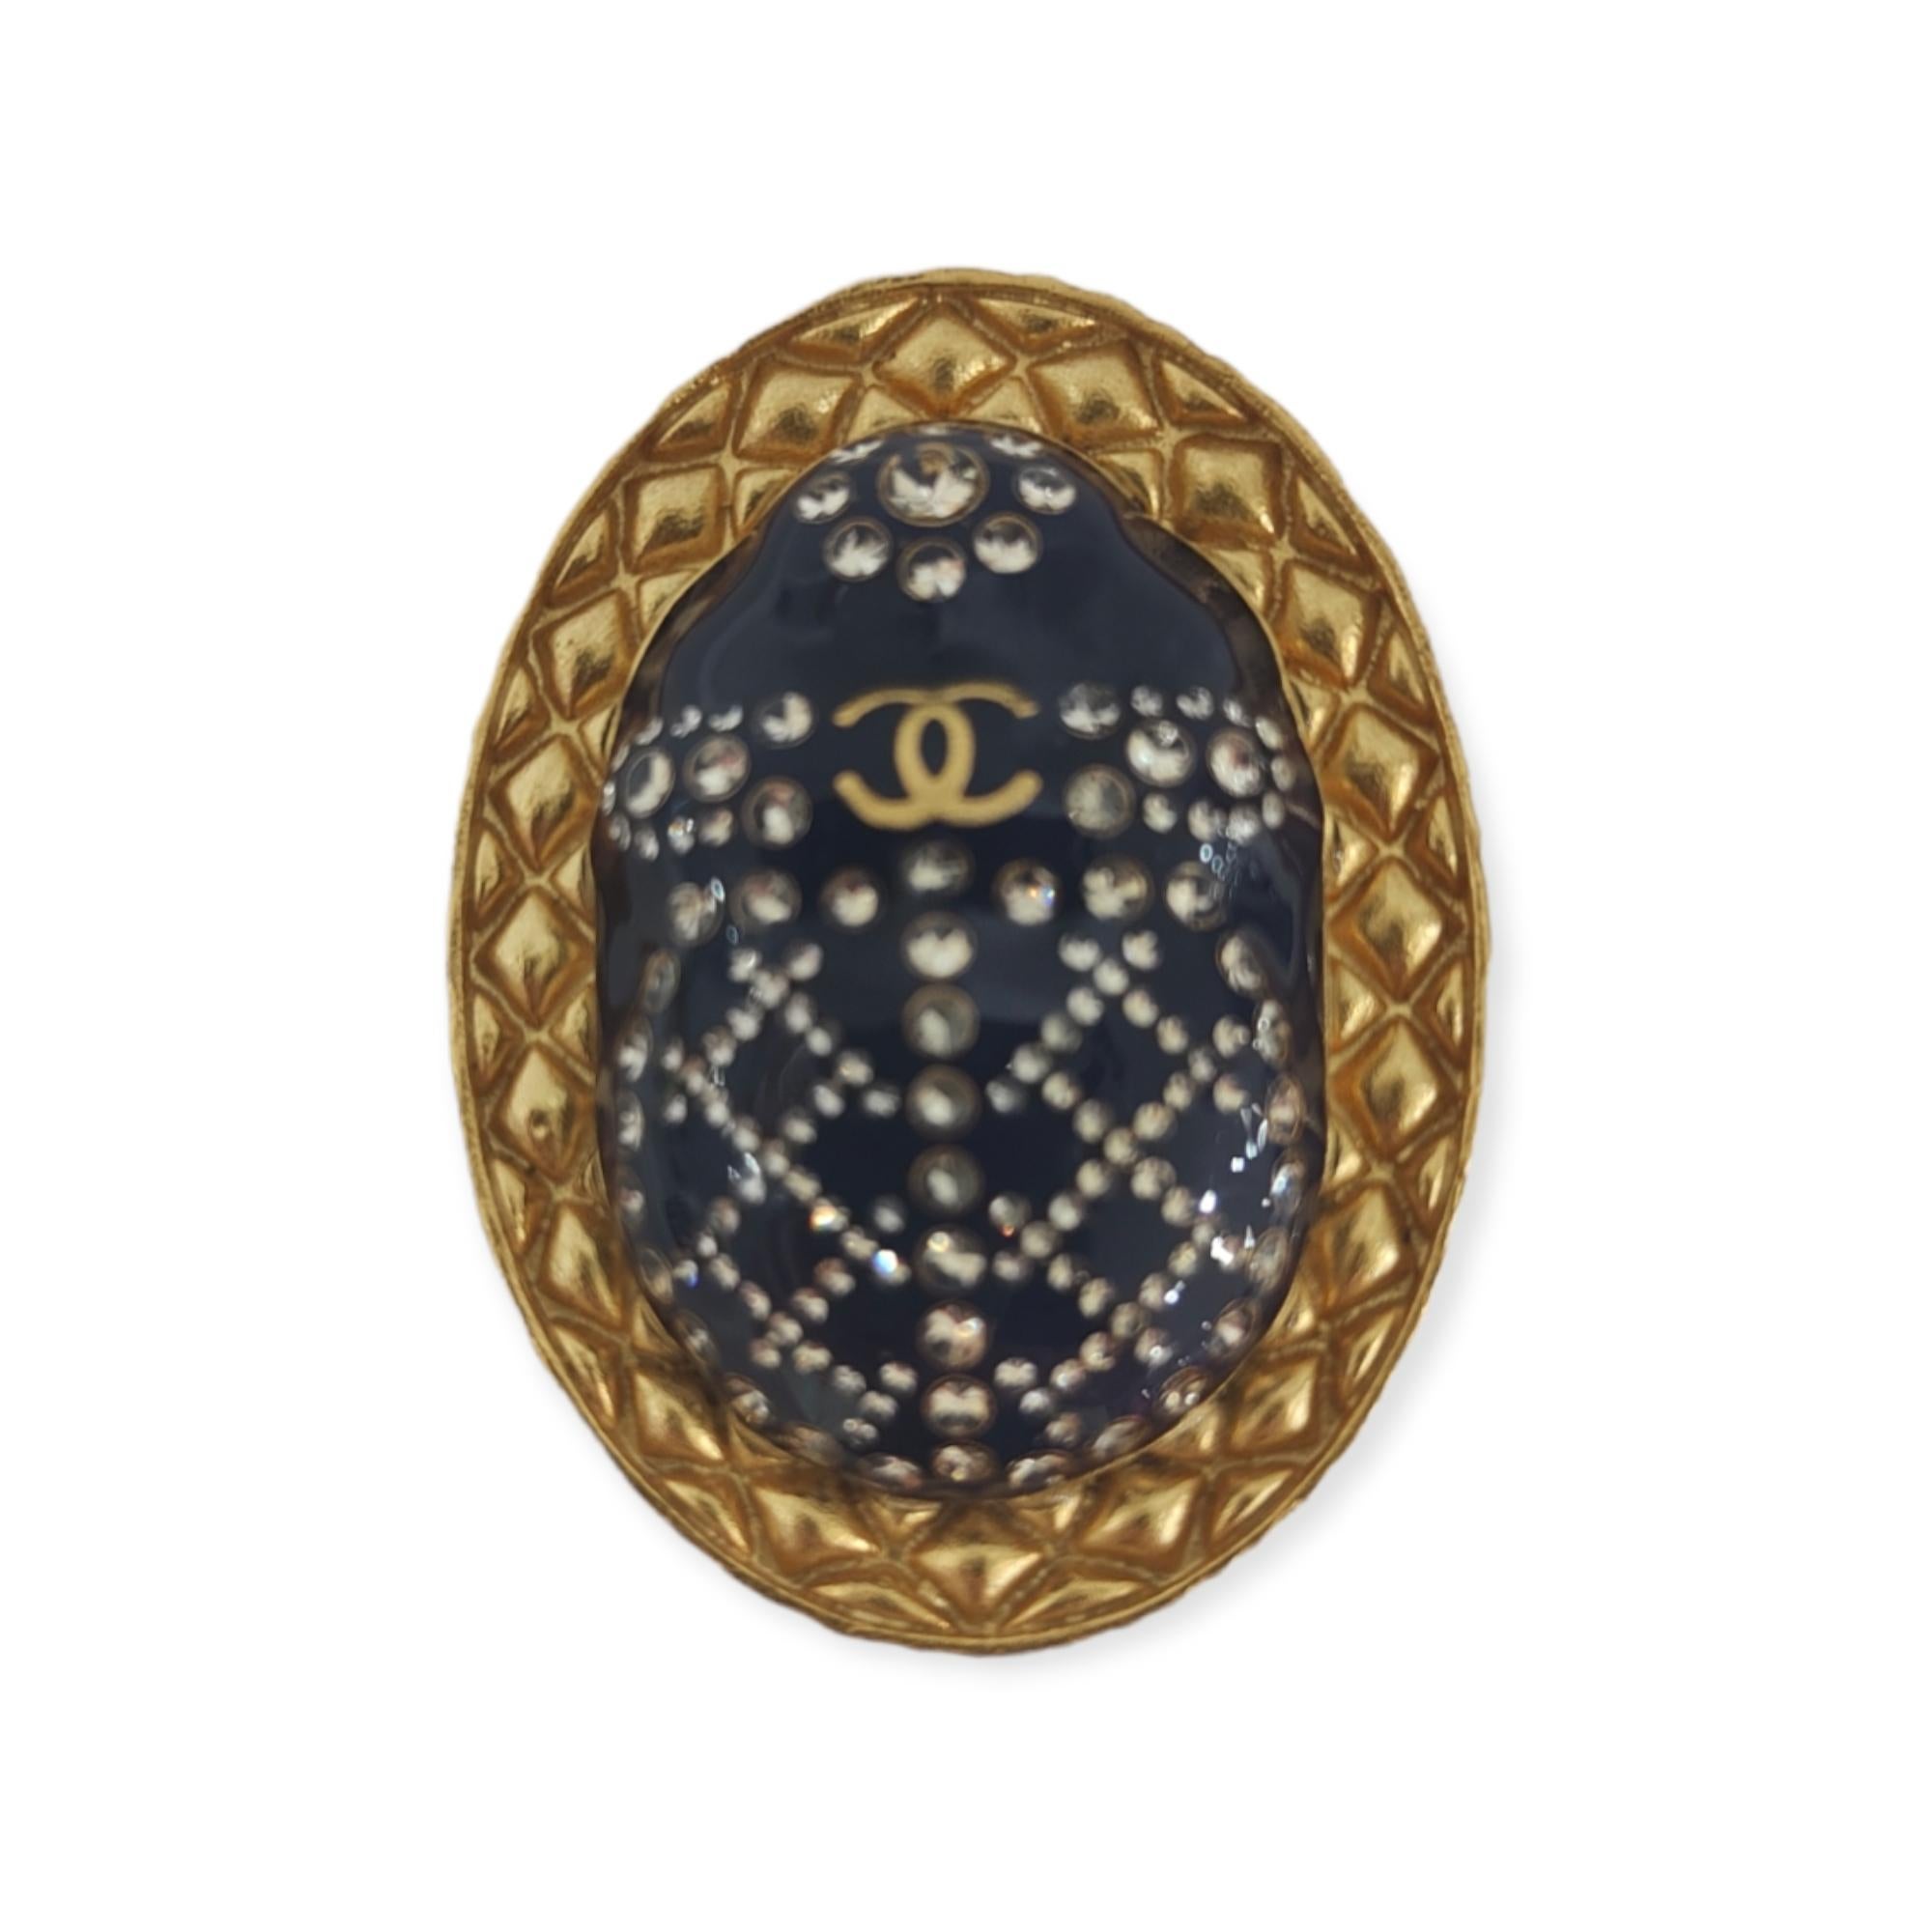 2019 Chanel Egypt collection beetle brooch
gold tone, blue with swarovski stones CC Chanel Egypt collection brooch
hieroglyphics on the back